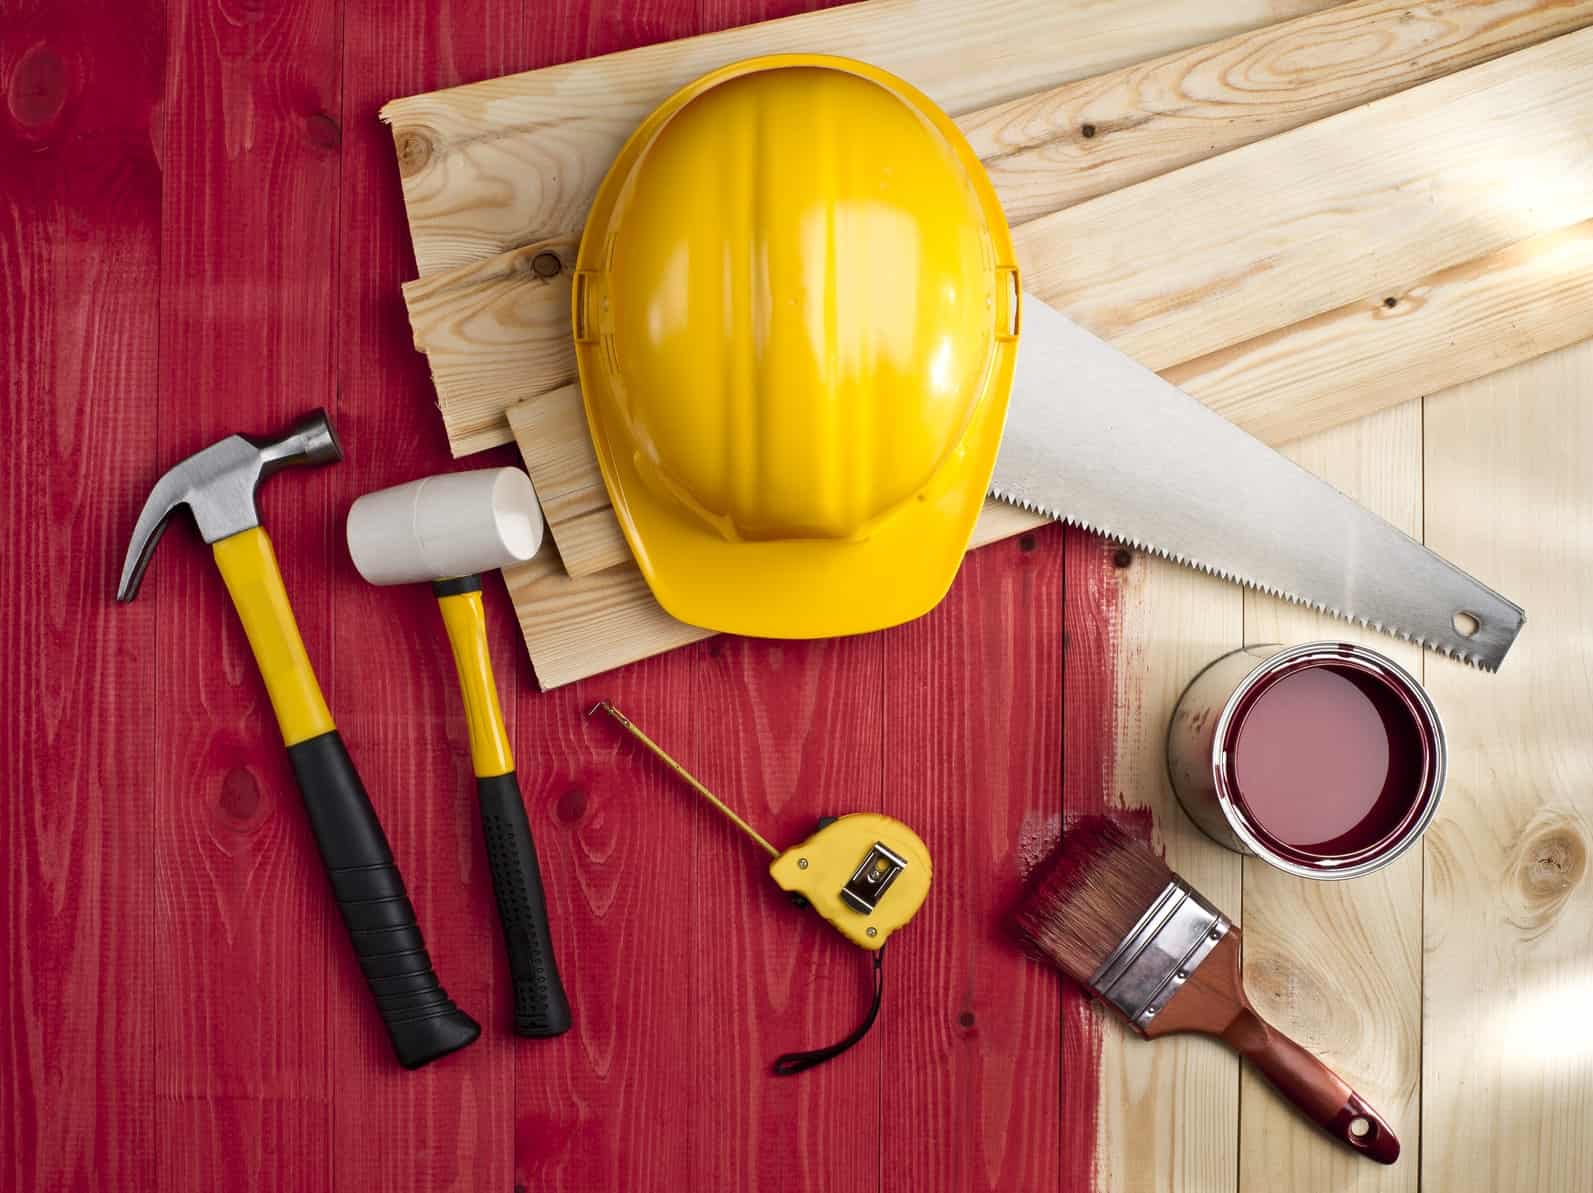 What Are Basic Safety Practices For Construction Sites?